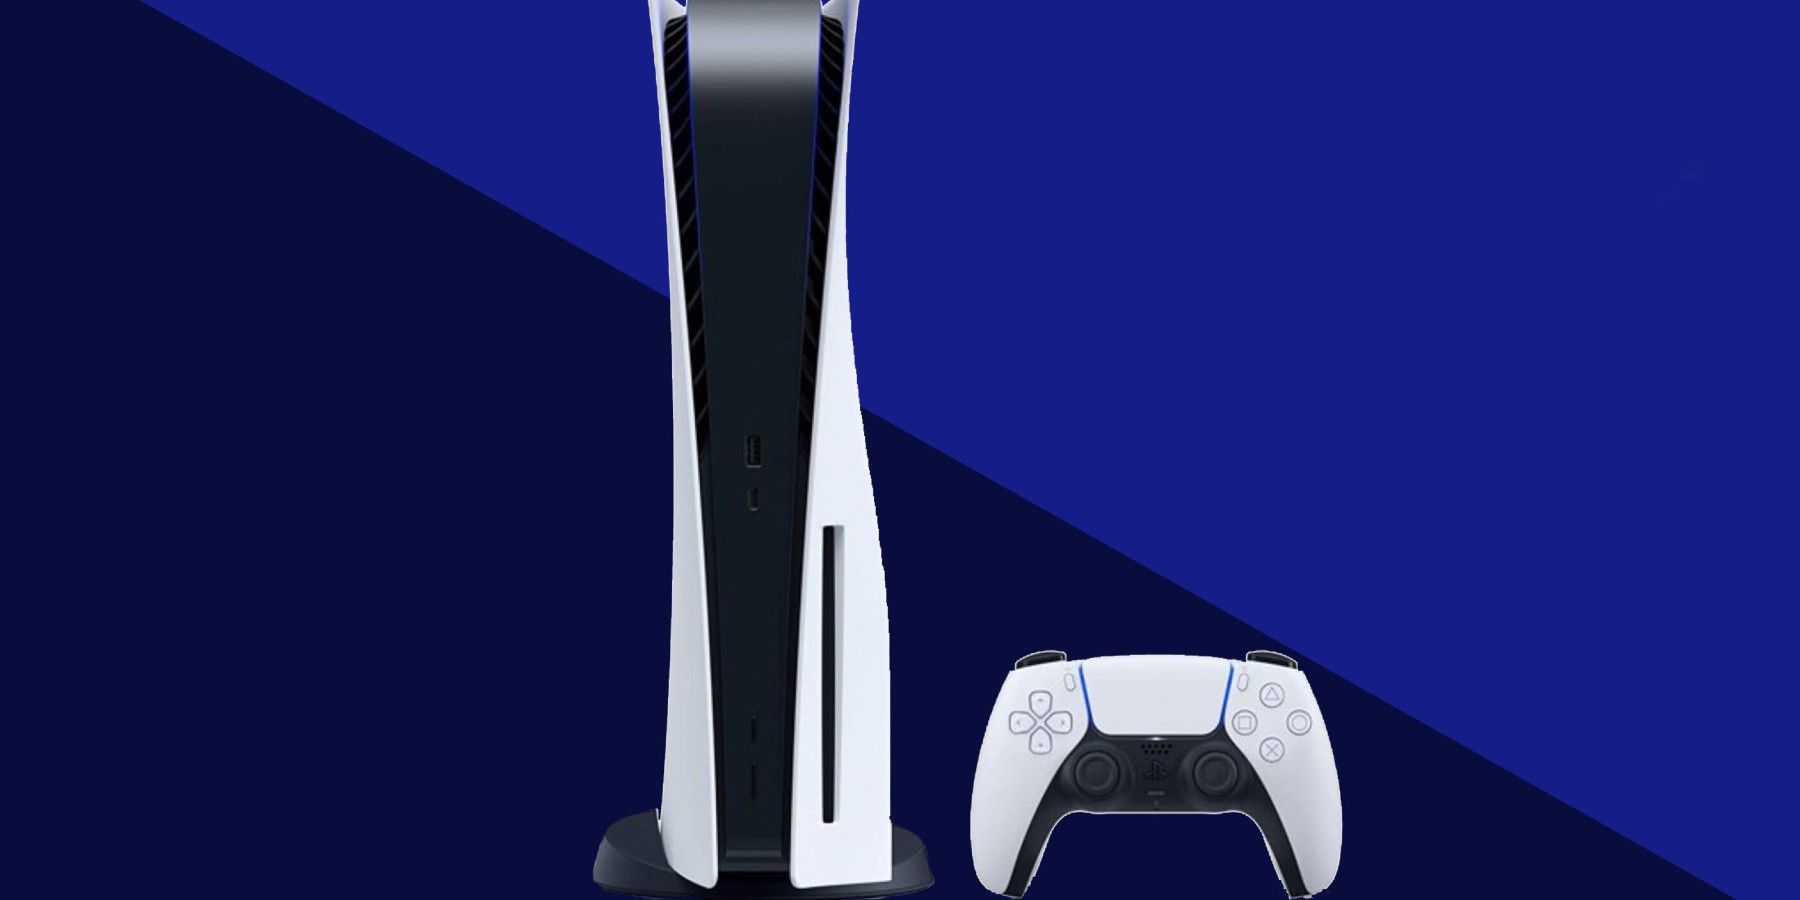 ps5 and controller with blue background